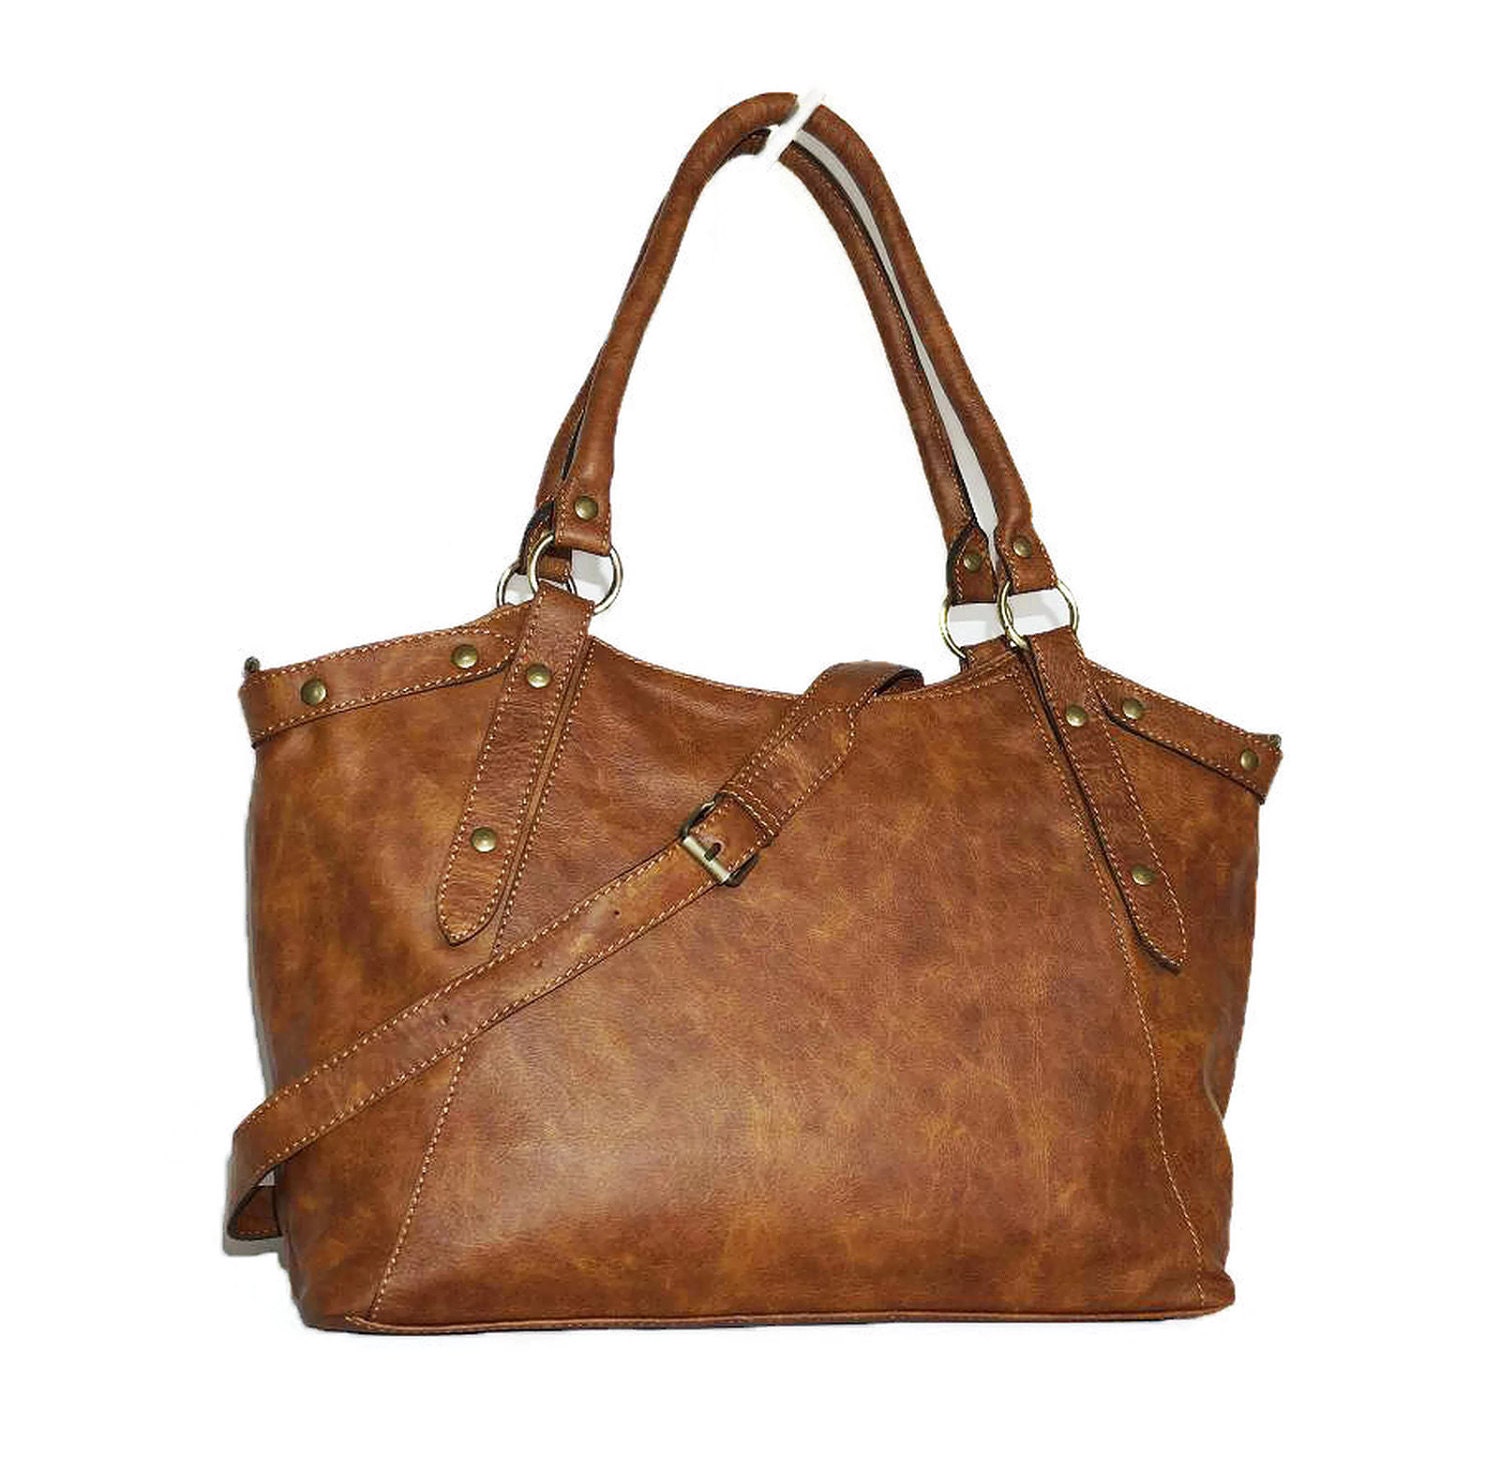 RUSTIC Leather Bag Leather Bag Handbag Tote by ChicLeather
 Rustic Leather Purses